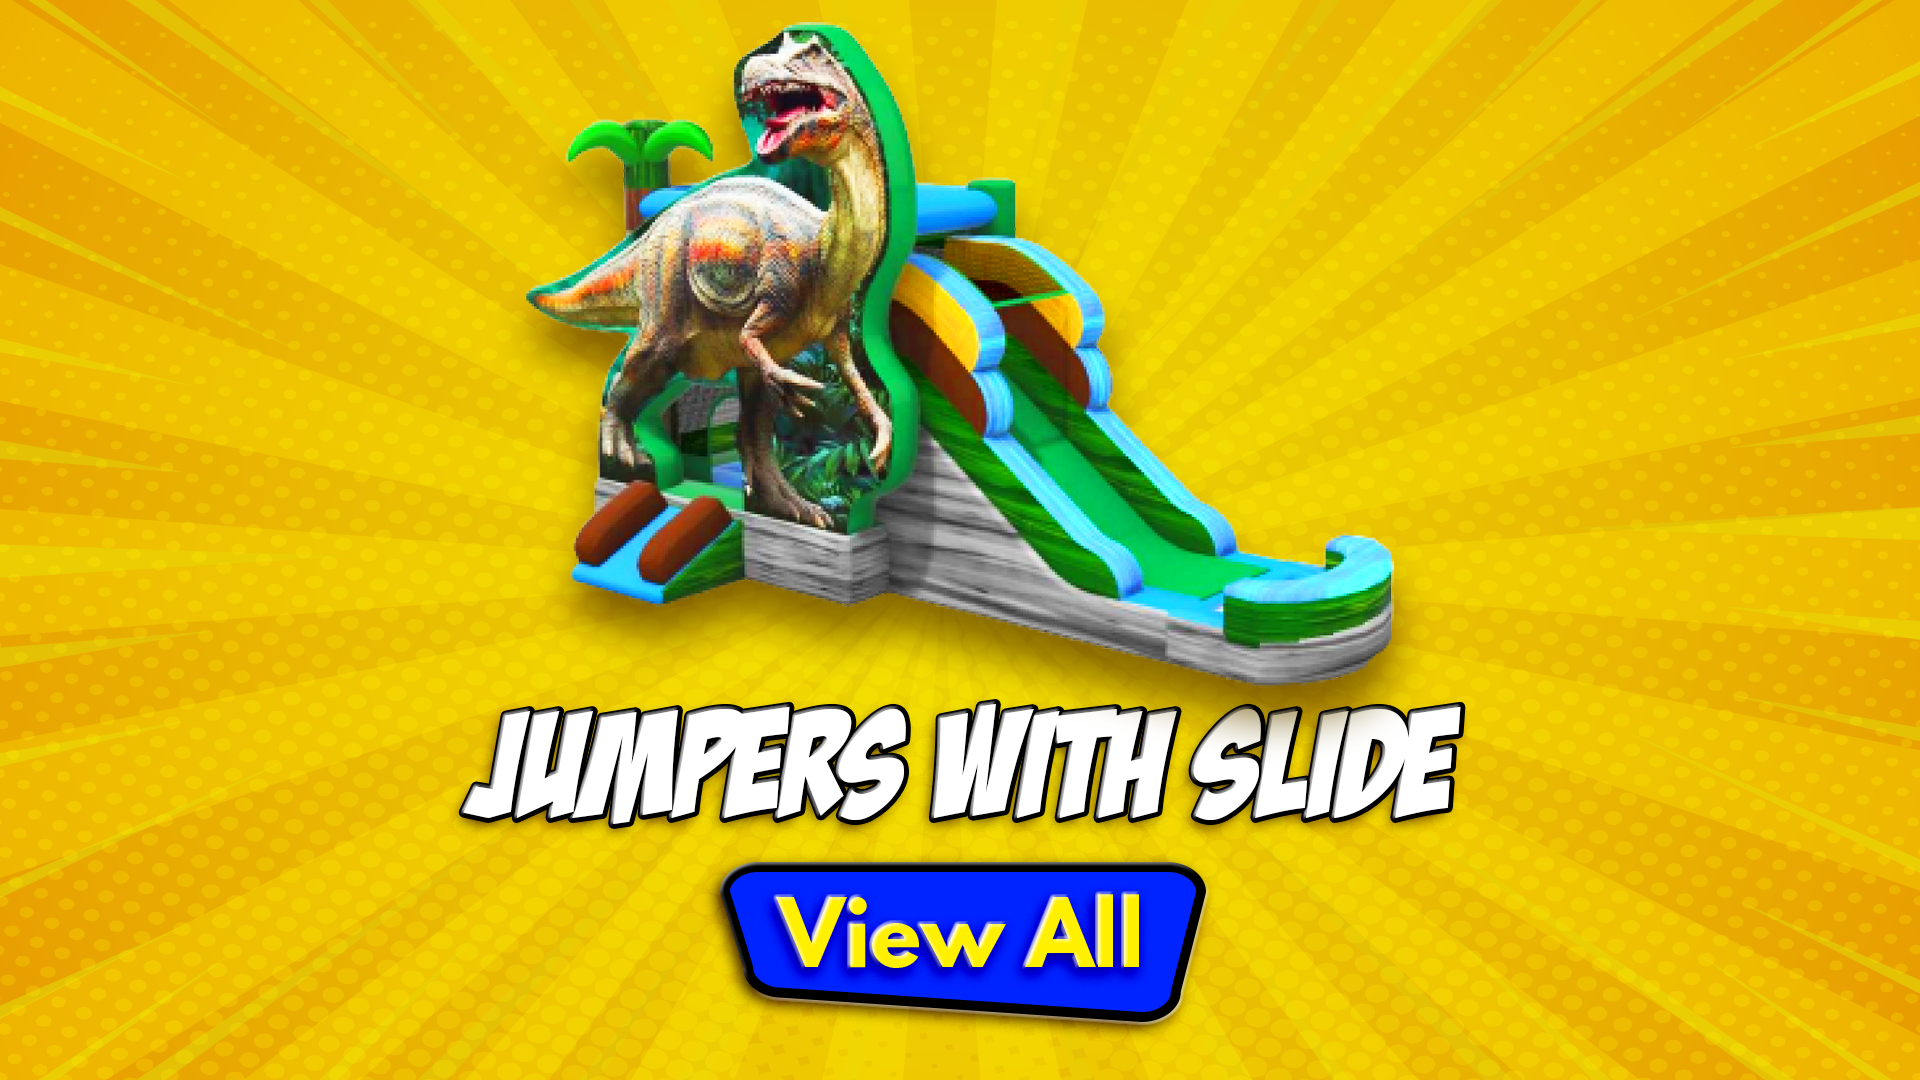 Jumpers with slide in Fremont